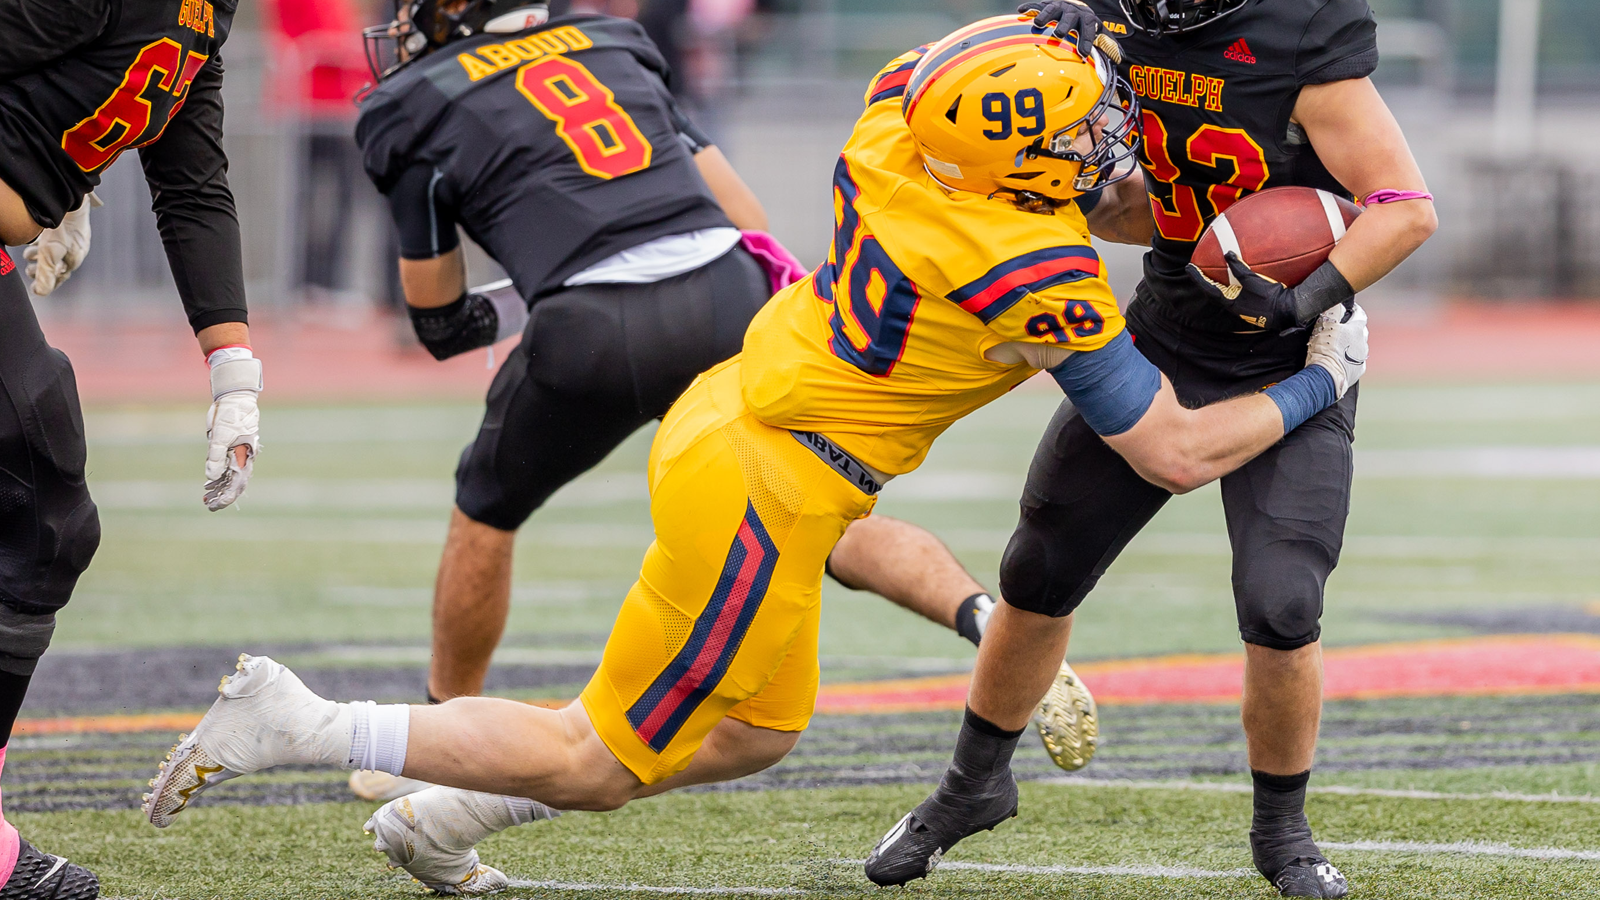 Action photo of Queen's football player tackling a Guelph football player during a game